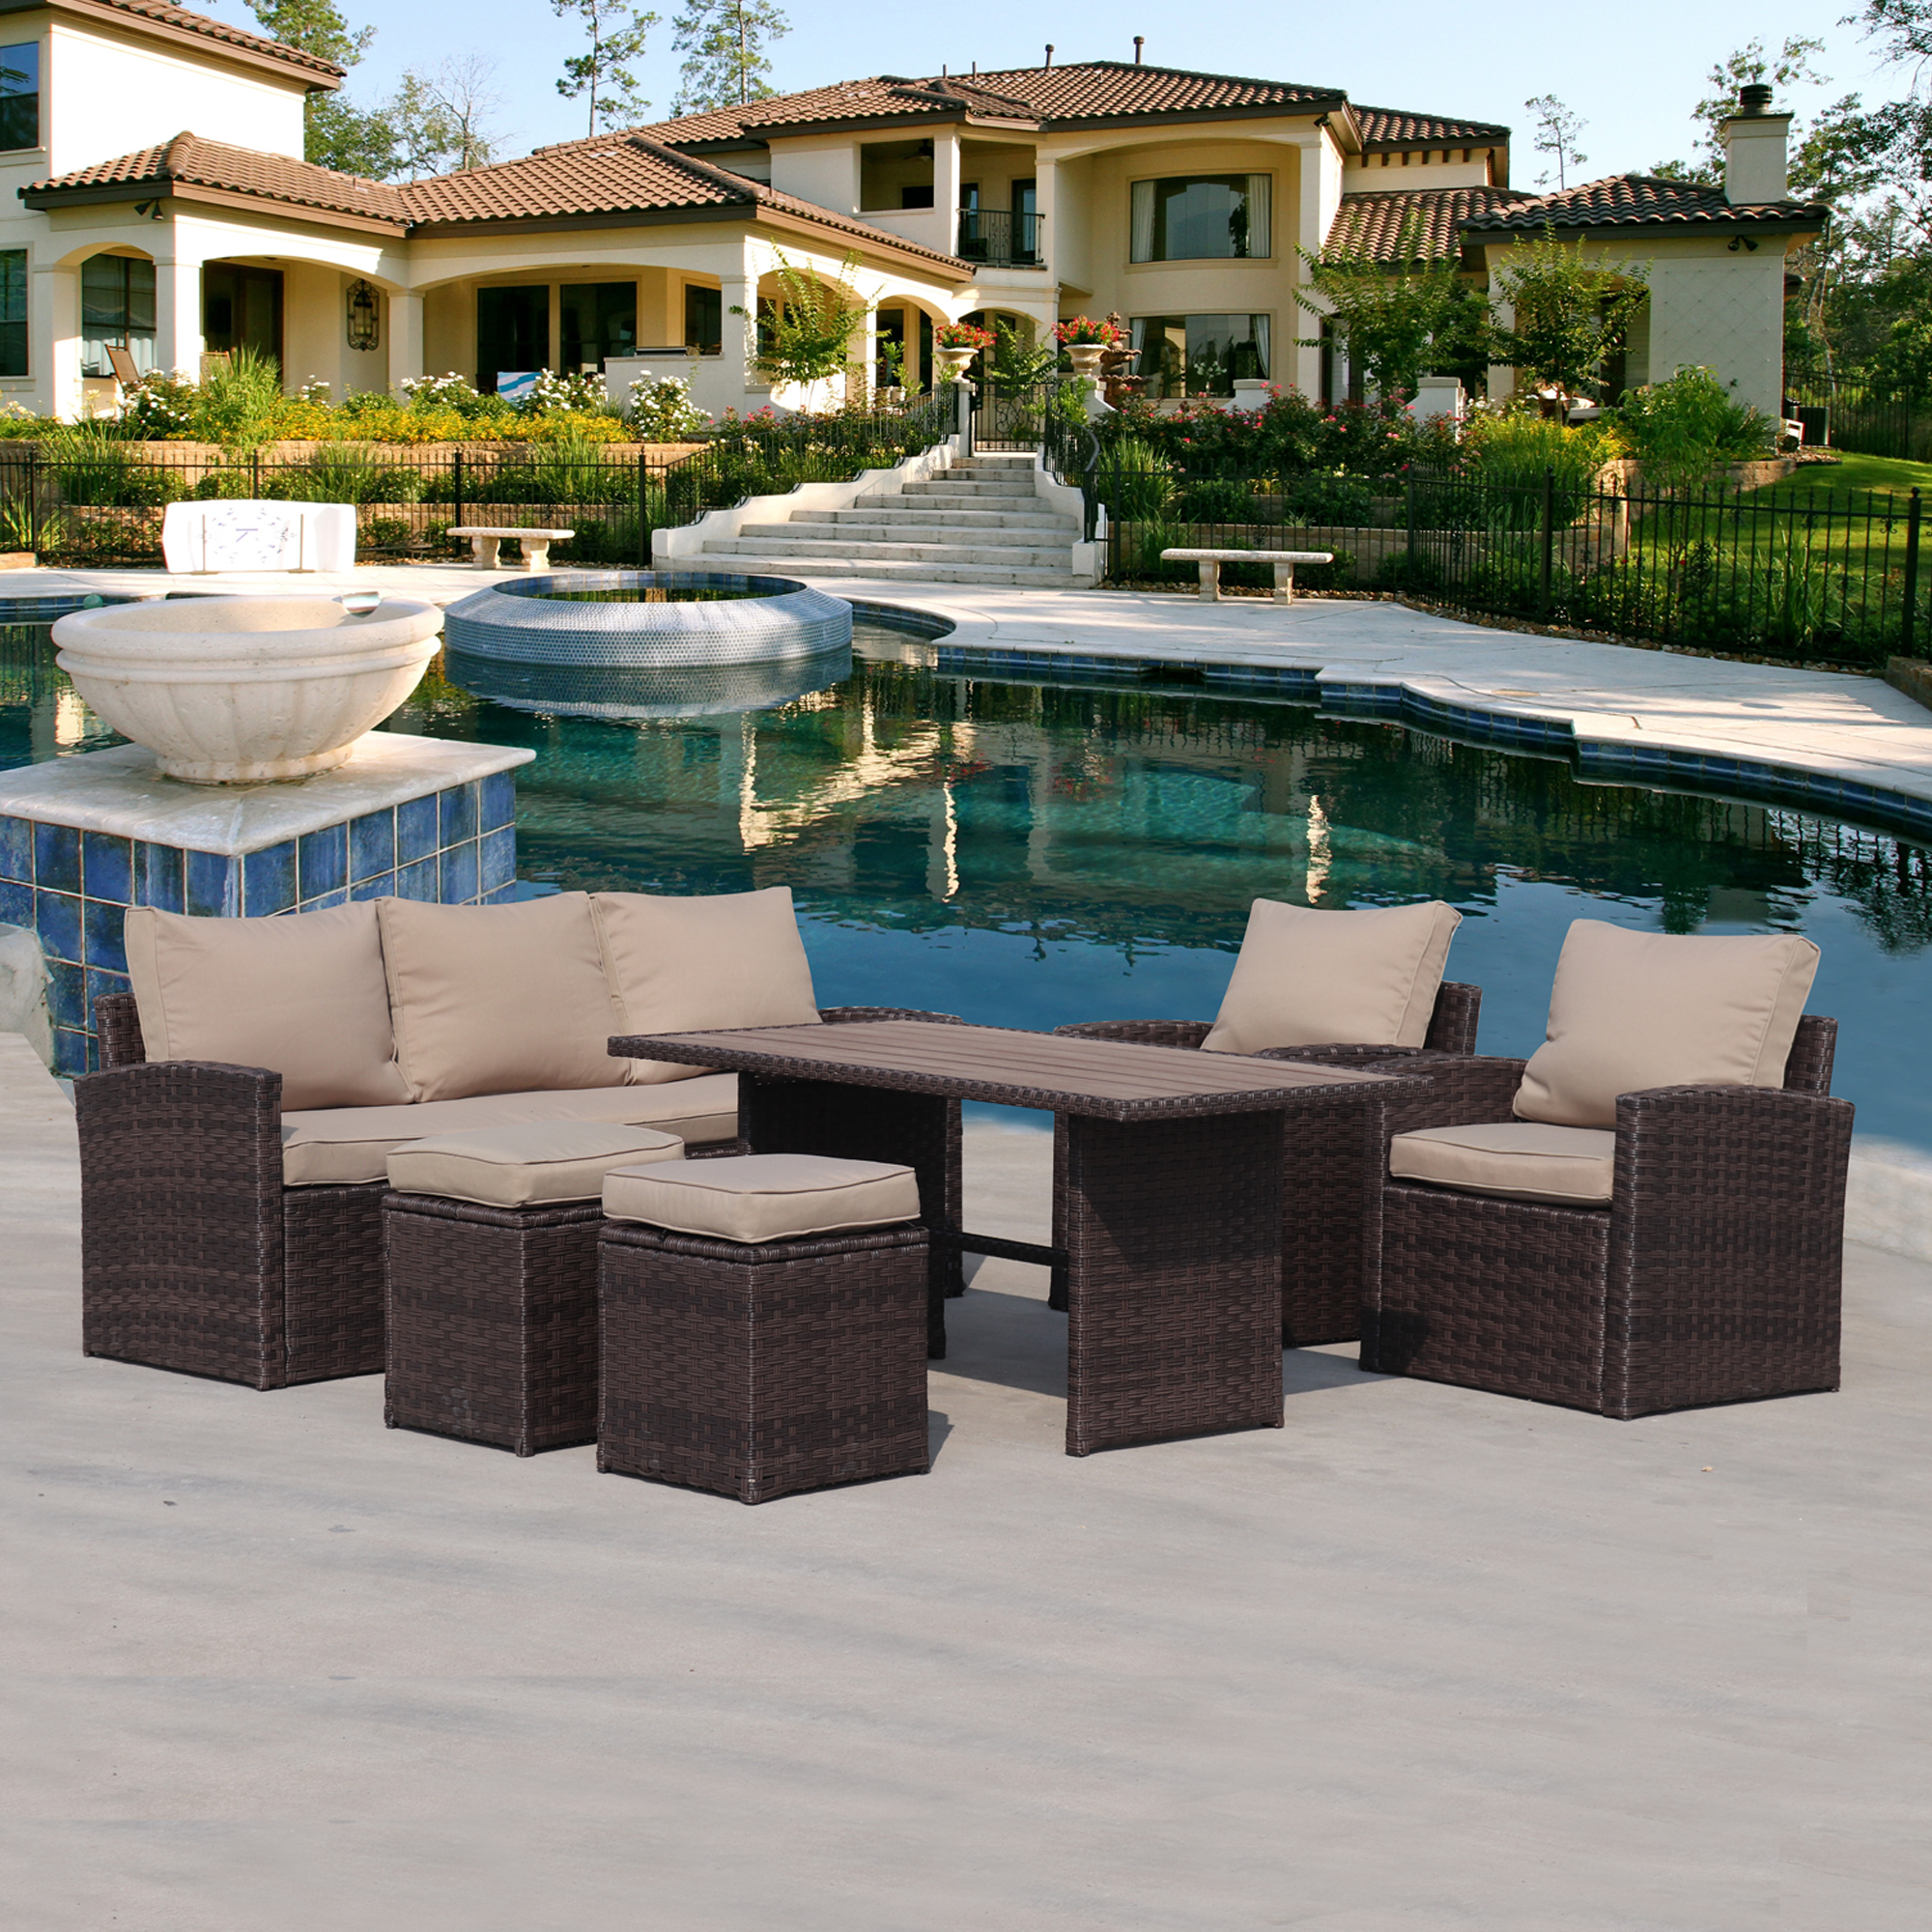 Outdoor Conversation Sofa Set, 6 Piece Patio Sectional Dining Table Chair with Ottomans & Cushions, PE Rattan Wicker Cushioned Couch Set for Pool Lawn Patio Backyard, Sectional Furniture Set - image 1 of 9